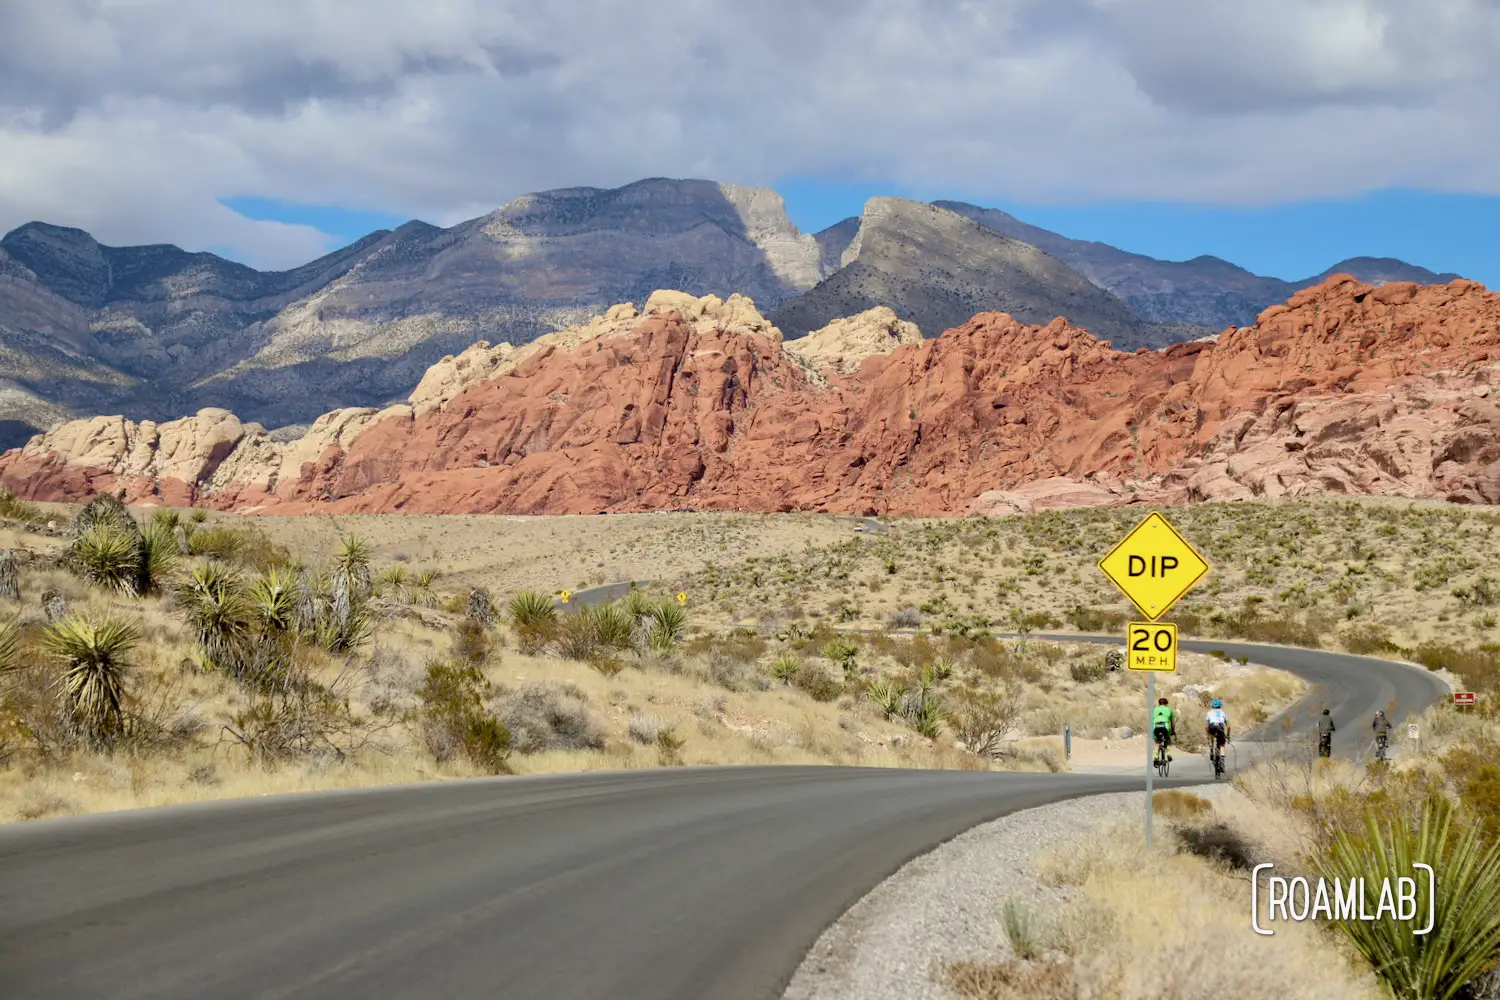 Two cyclists traveling down a paved road winding toward red rock cliffs.